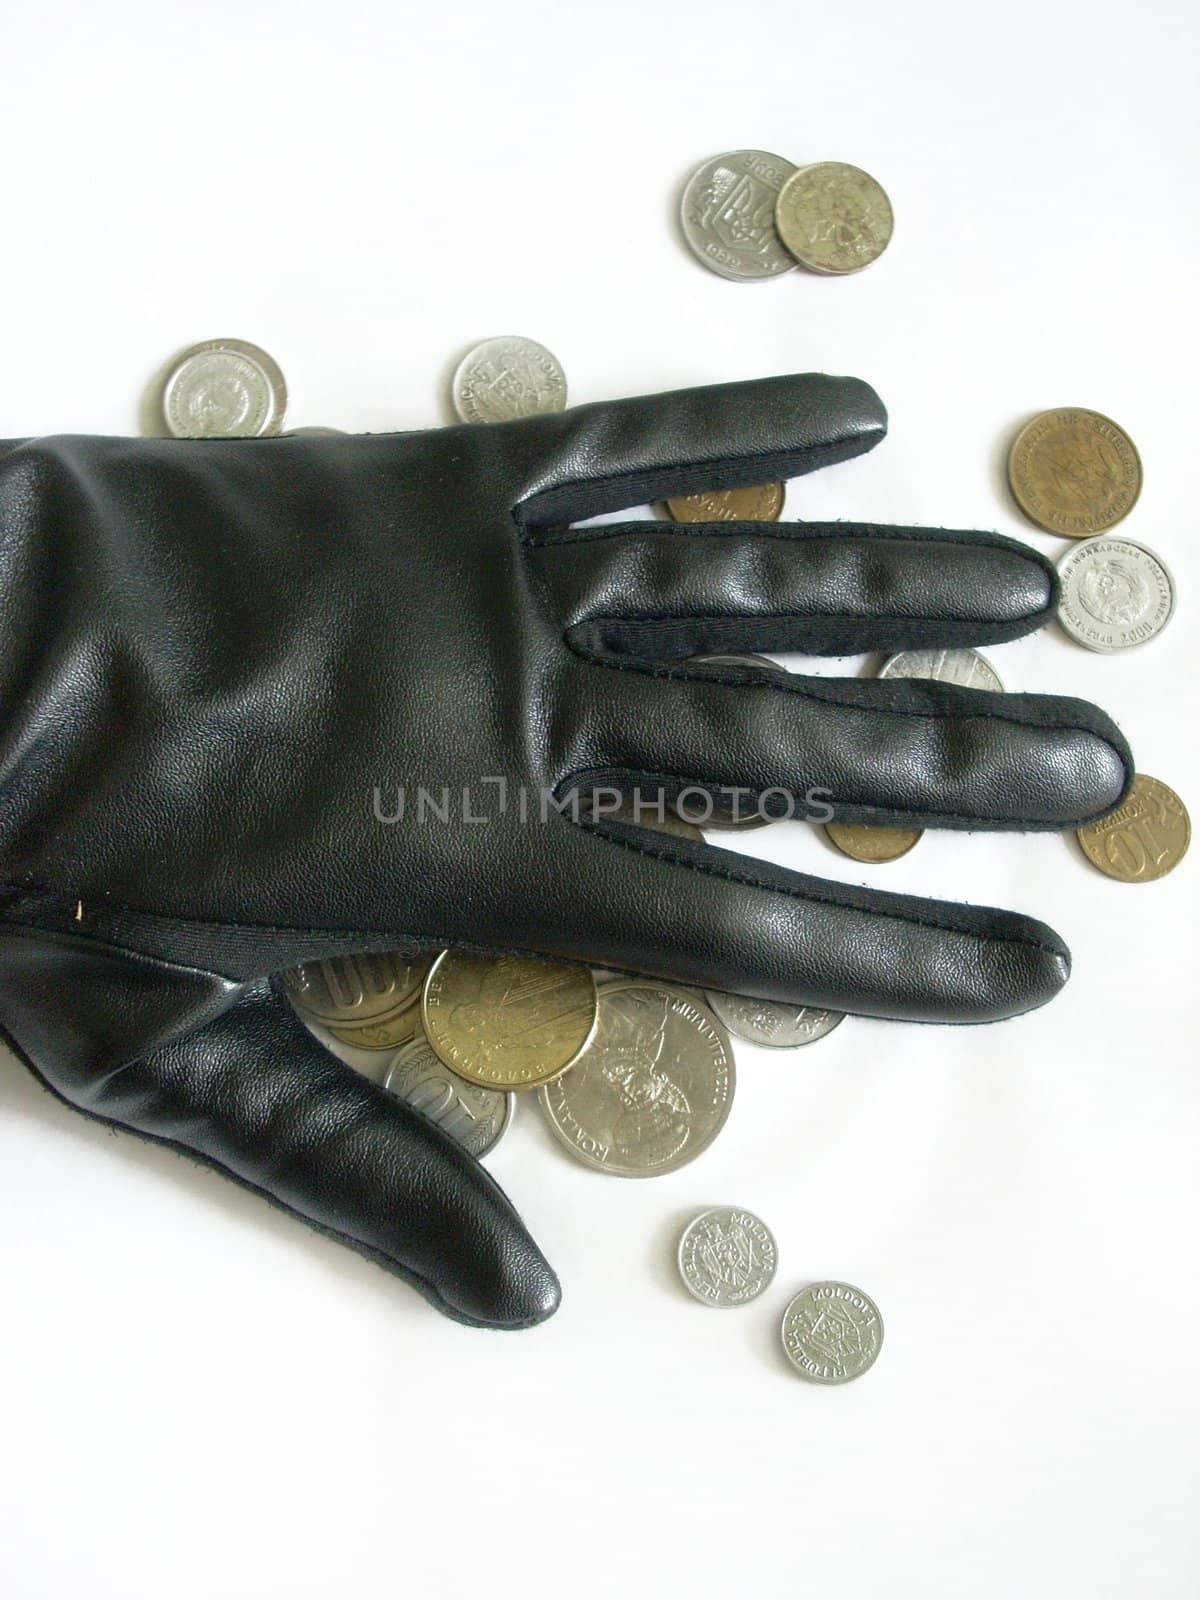 Glove and coins by DOODNICK